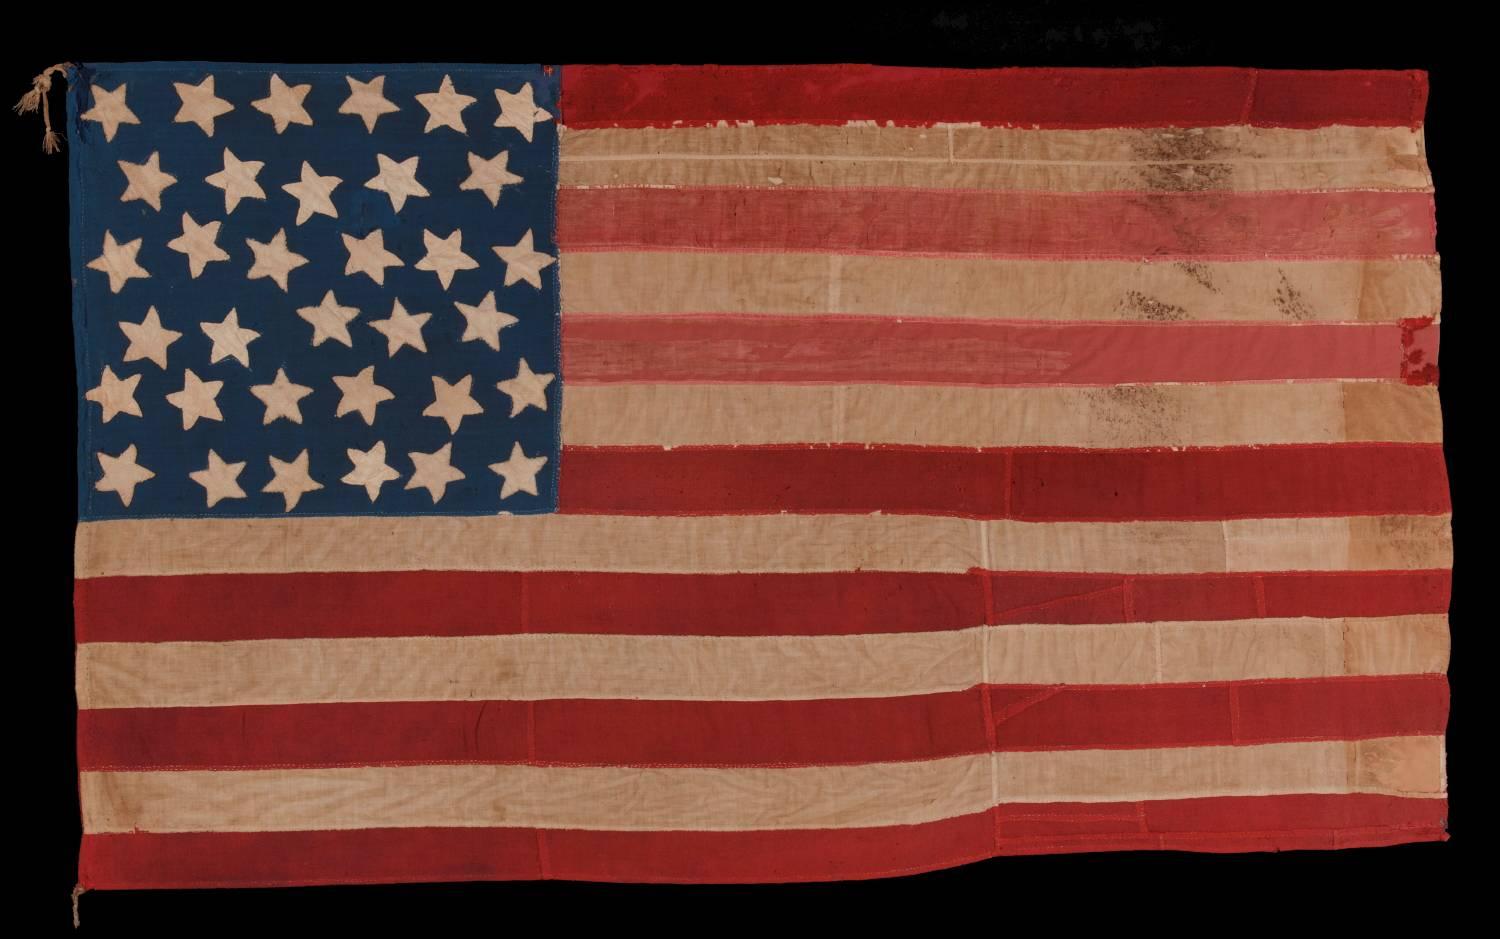 34 star, hand-sewn, homemade, antique American flag of the civil war period, made of a combination of salvaged fabrics, including mens shirting, 1861-1863, opening years of the war, reflects the addition of Kansas :

Homemade American national